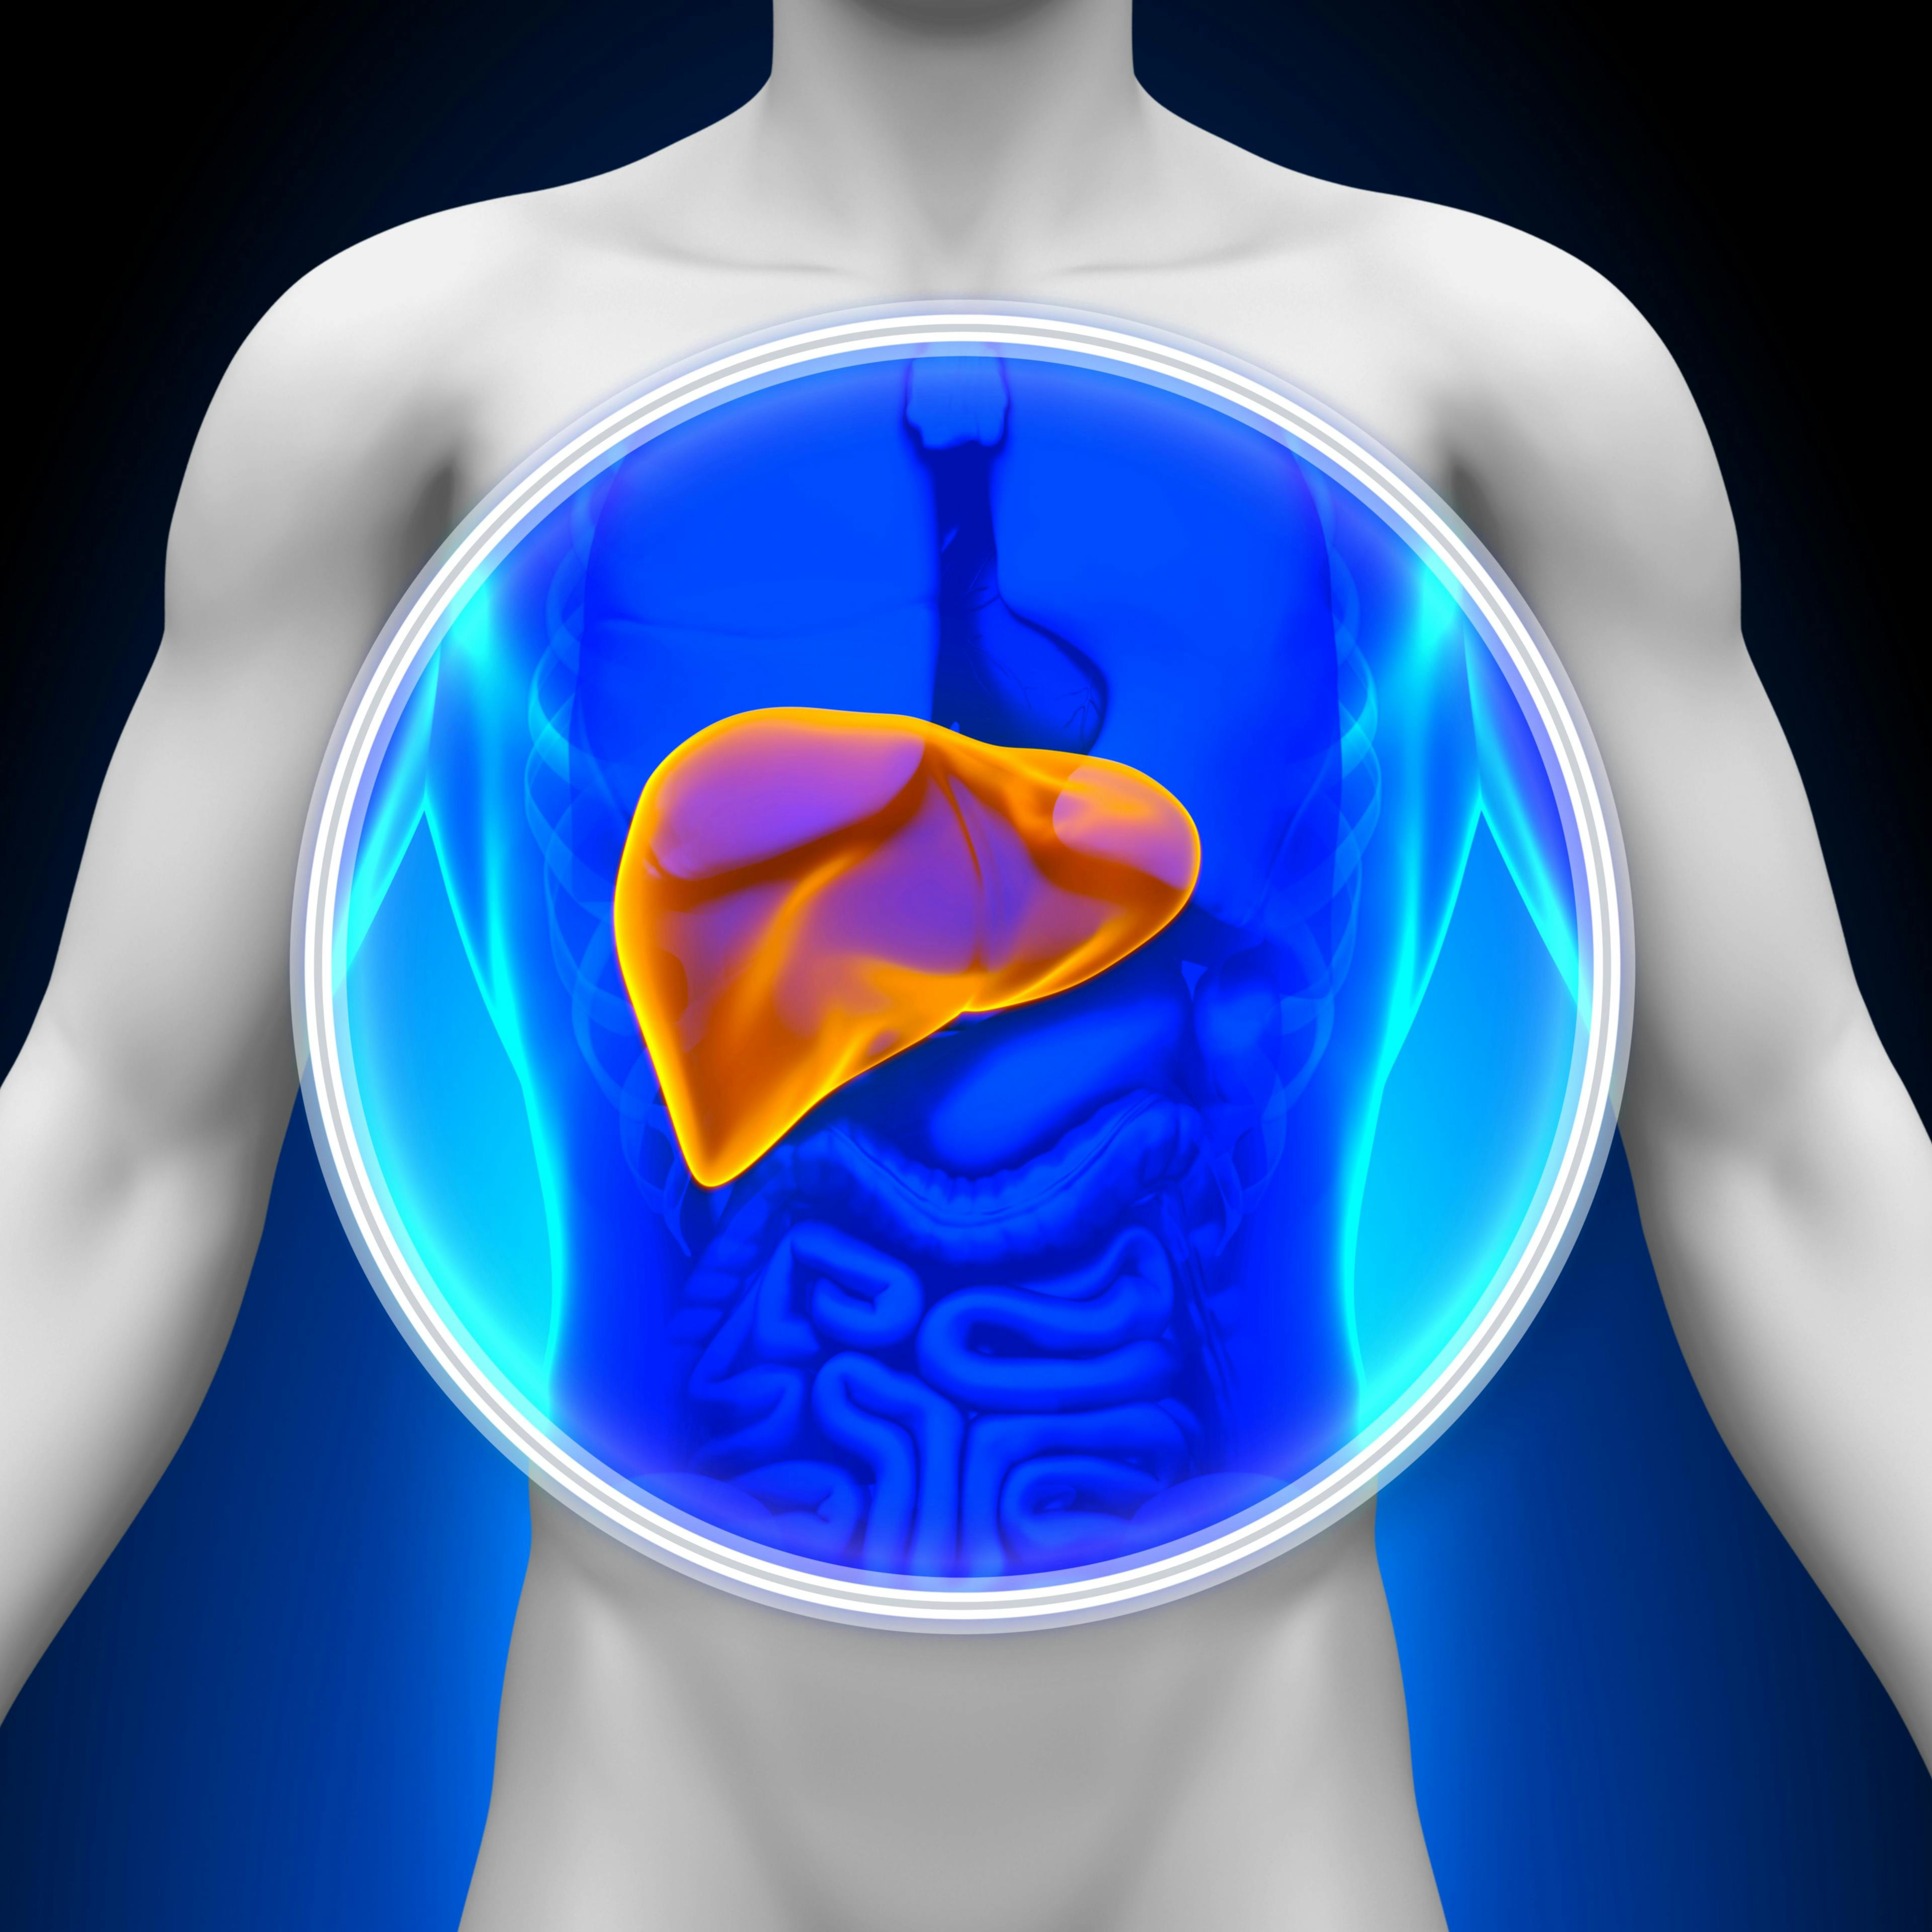 The NovoTTF-200T System was given a breakthrough designation by the FDA as treatment strategy that may work in conjunction with bevacizumab and atezolizumab to treat patients with advanced liver cancer.